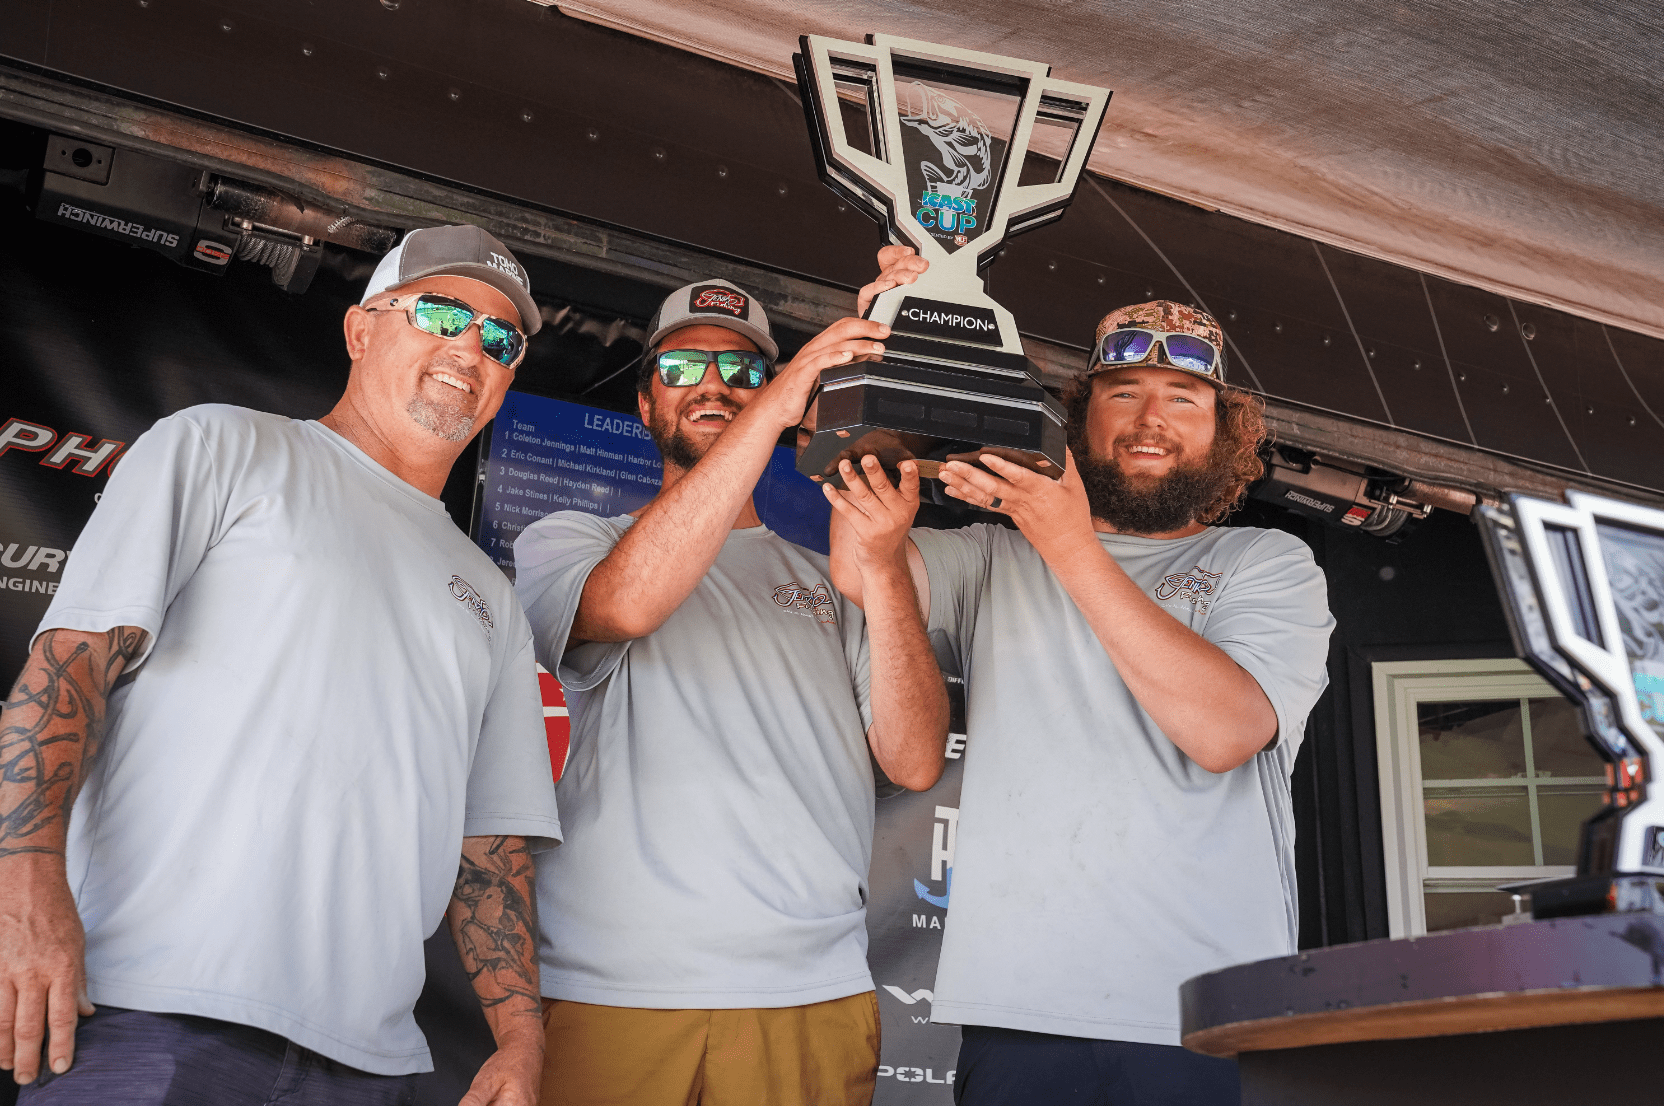 Jenko Fishing Wins Eighth-Annual ICAST Cup Presented by Major League Fishing on Lake Toho